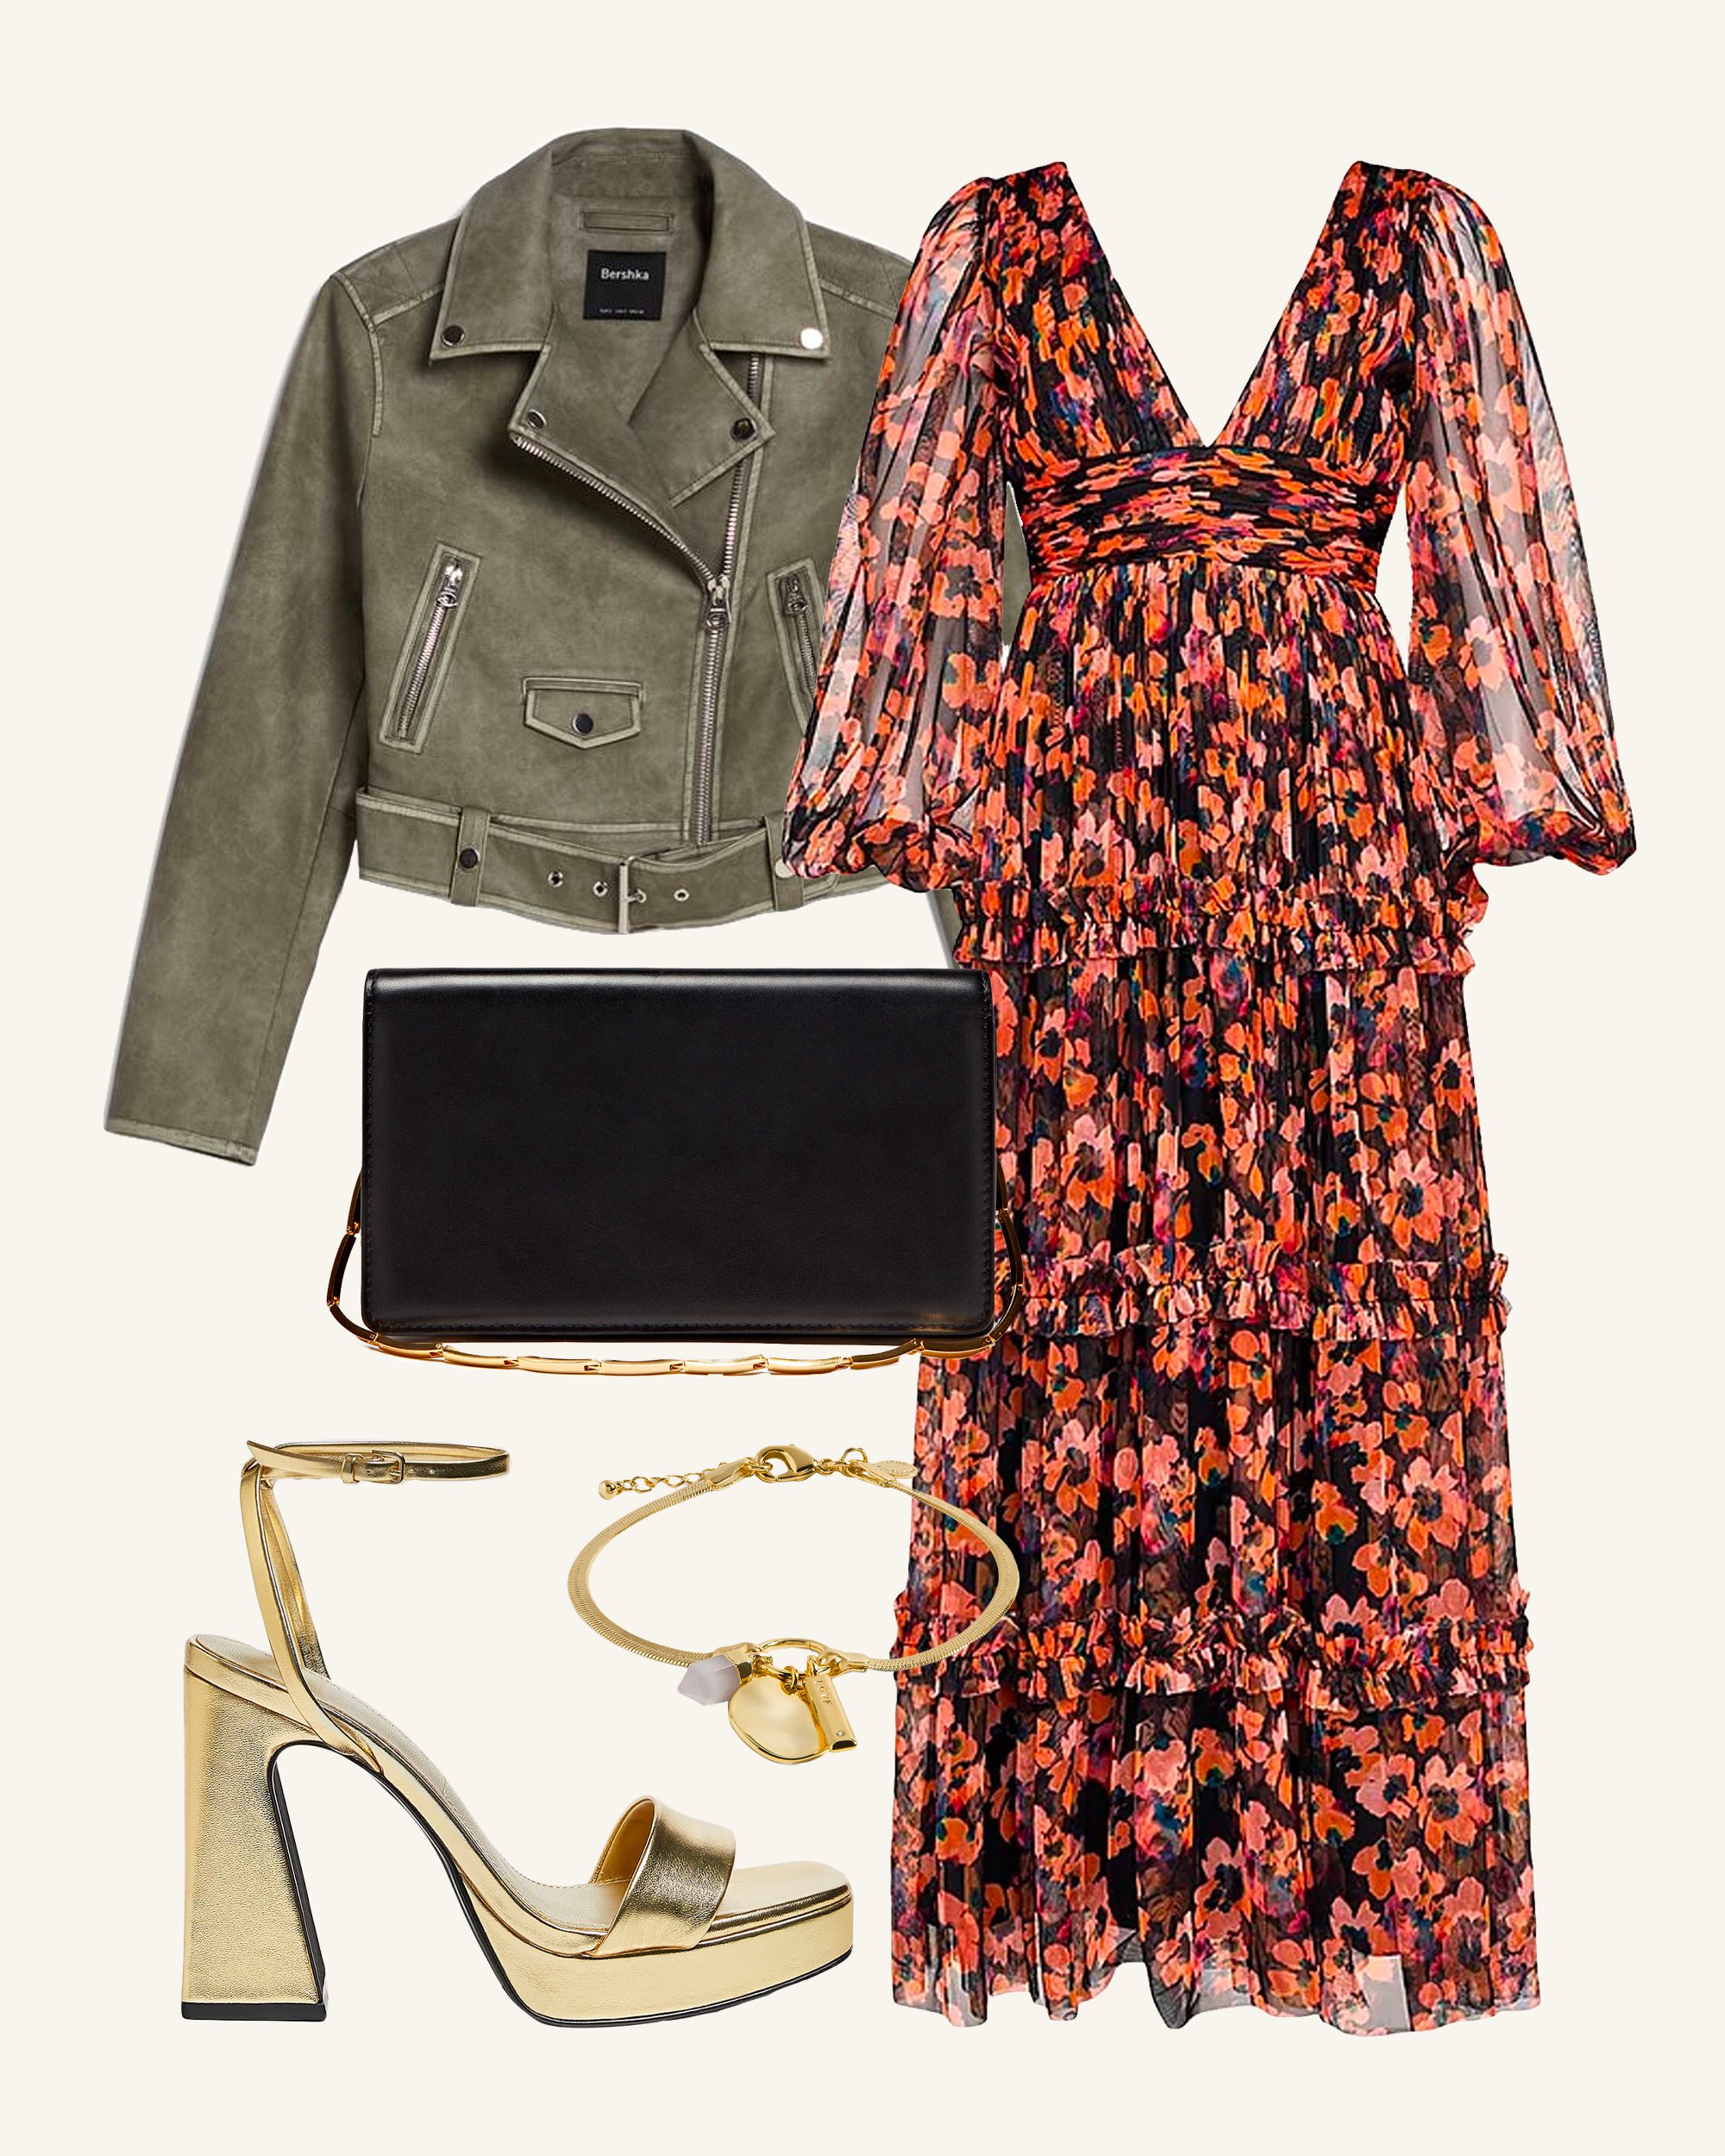 Spring Wedding Guest Outfit Ideas From The Best Of The High Street